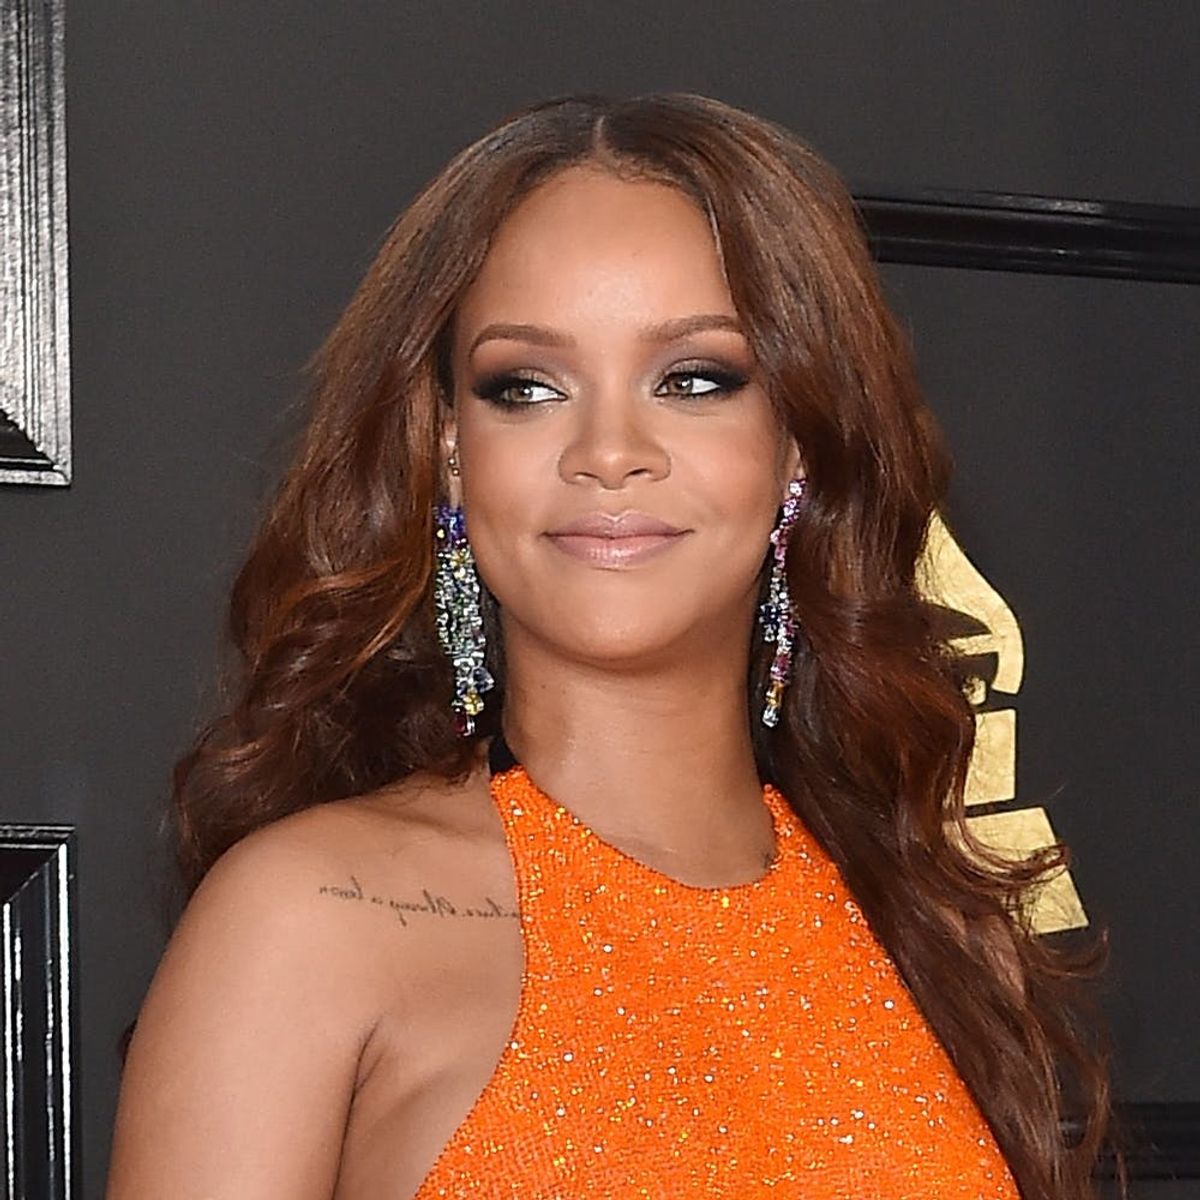 Rihanna Was Just Given a Totally Impressive Honor from Harvard